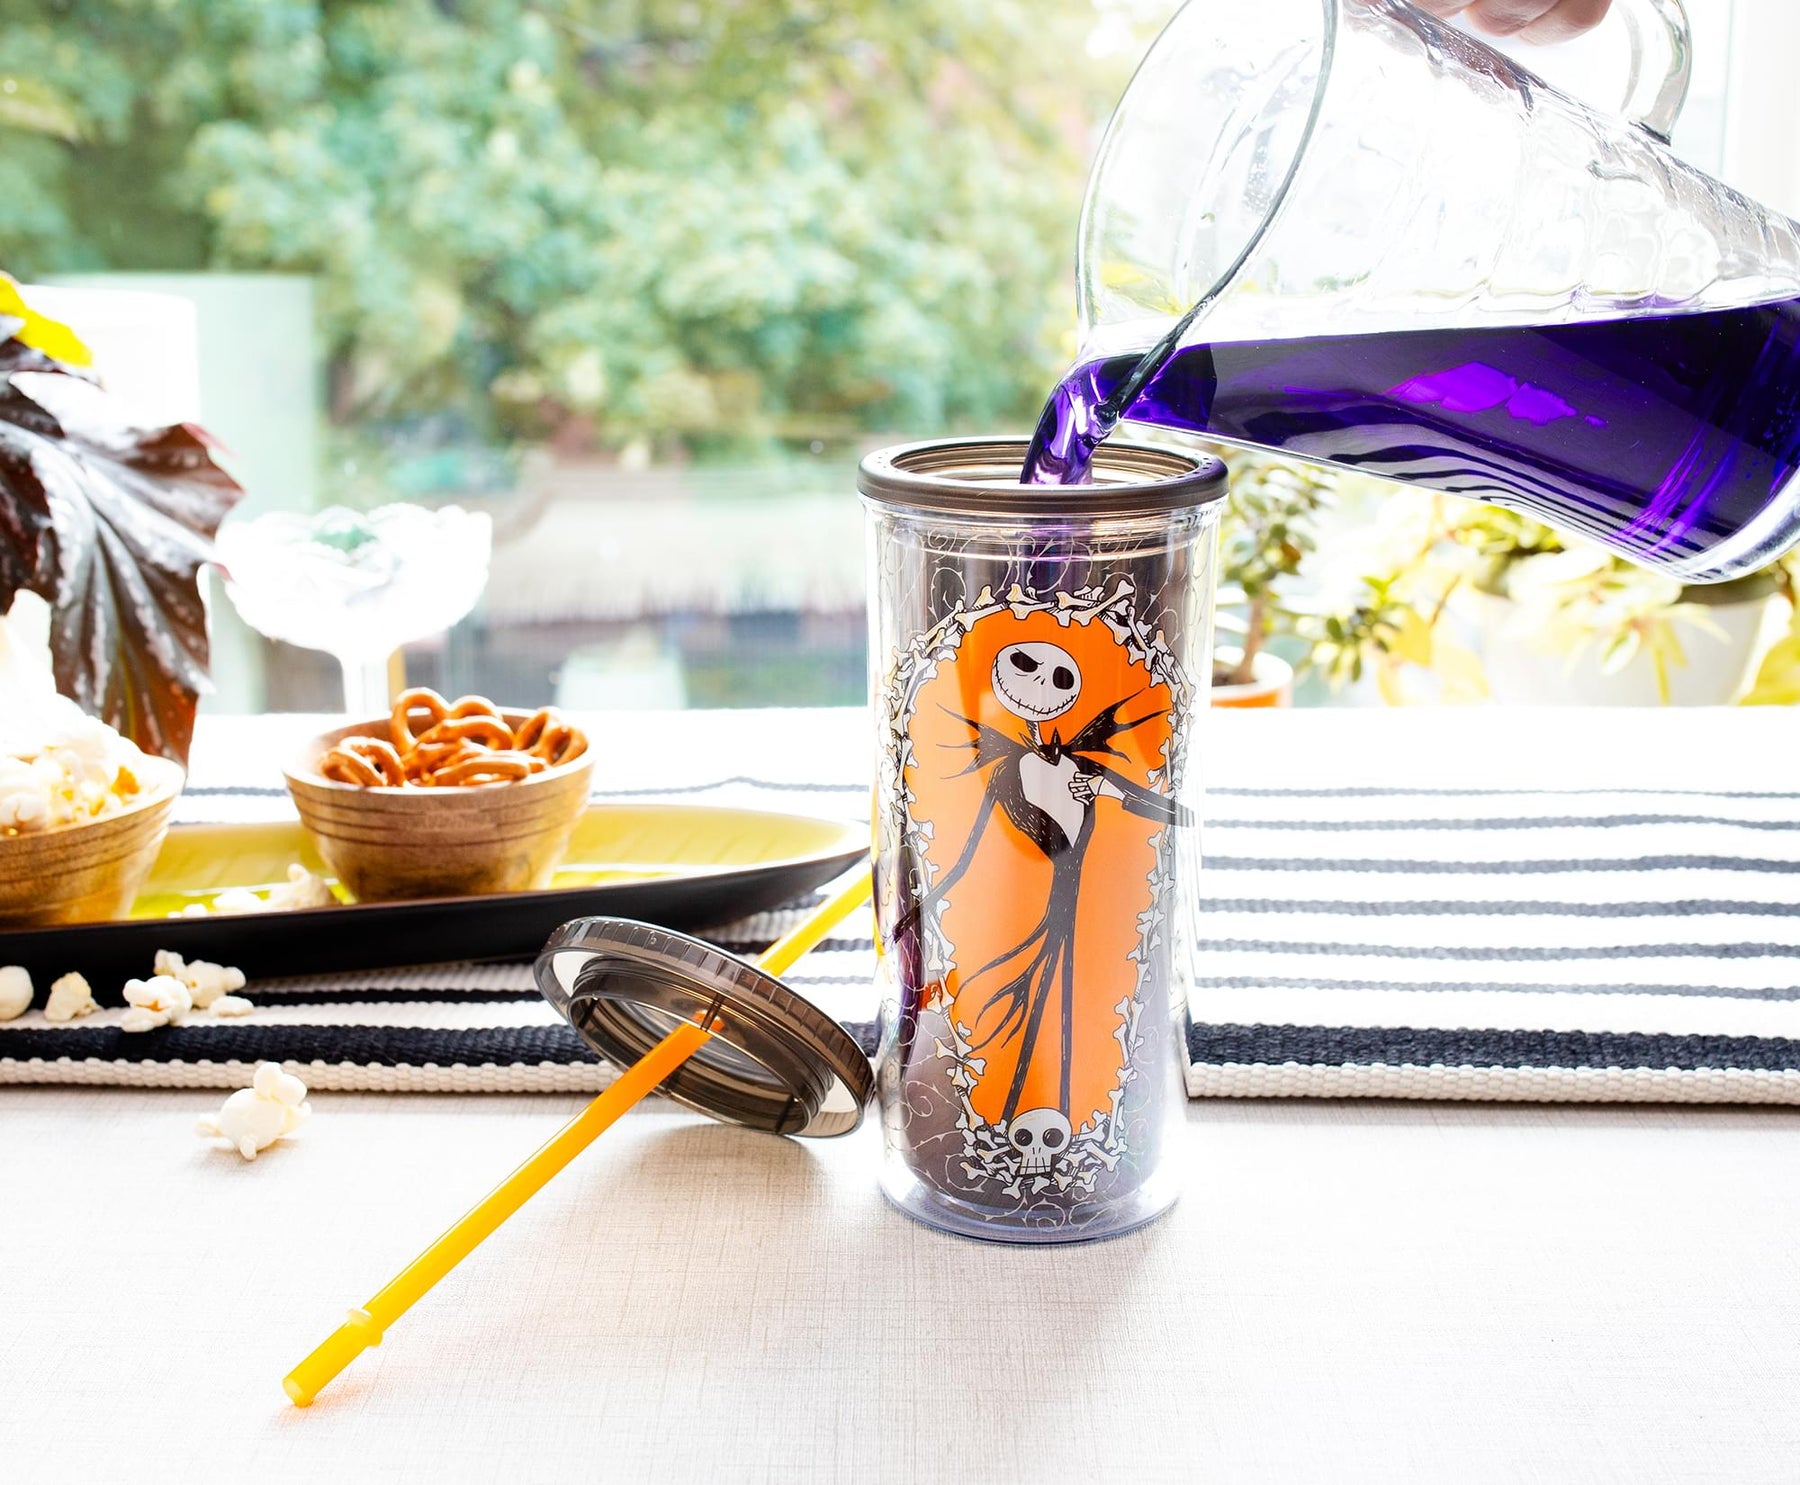 Silver Buffalo Disney The Nightmare Before Christmas Tumbler with Lid and  Straw | 32 Ounces